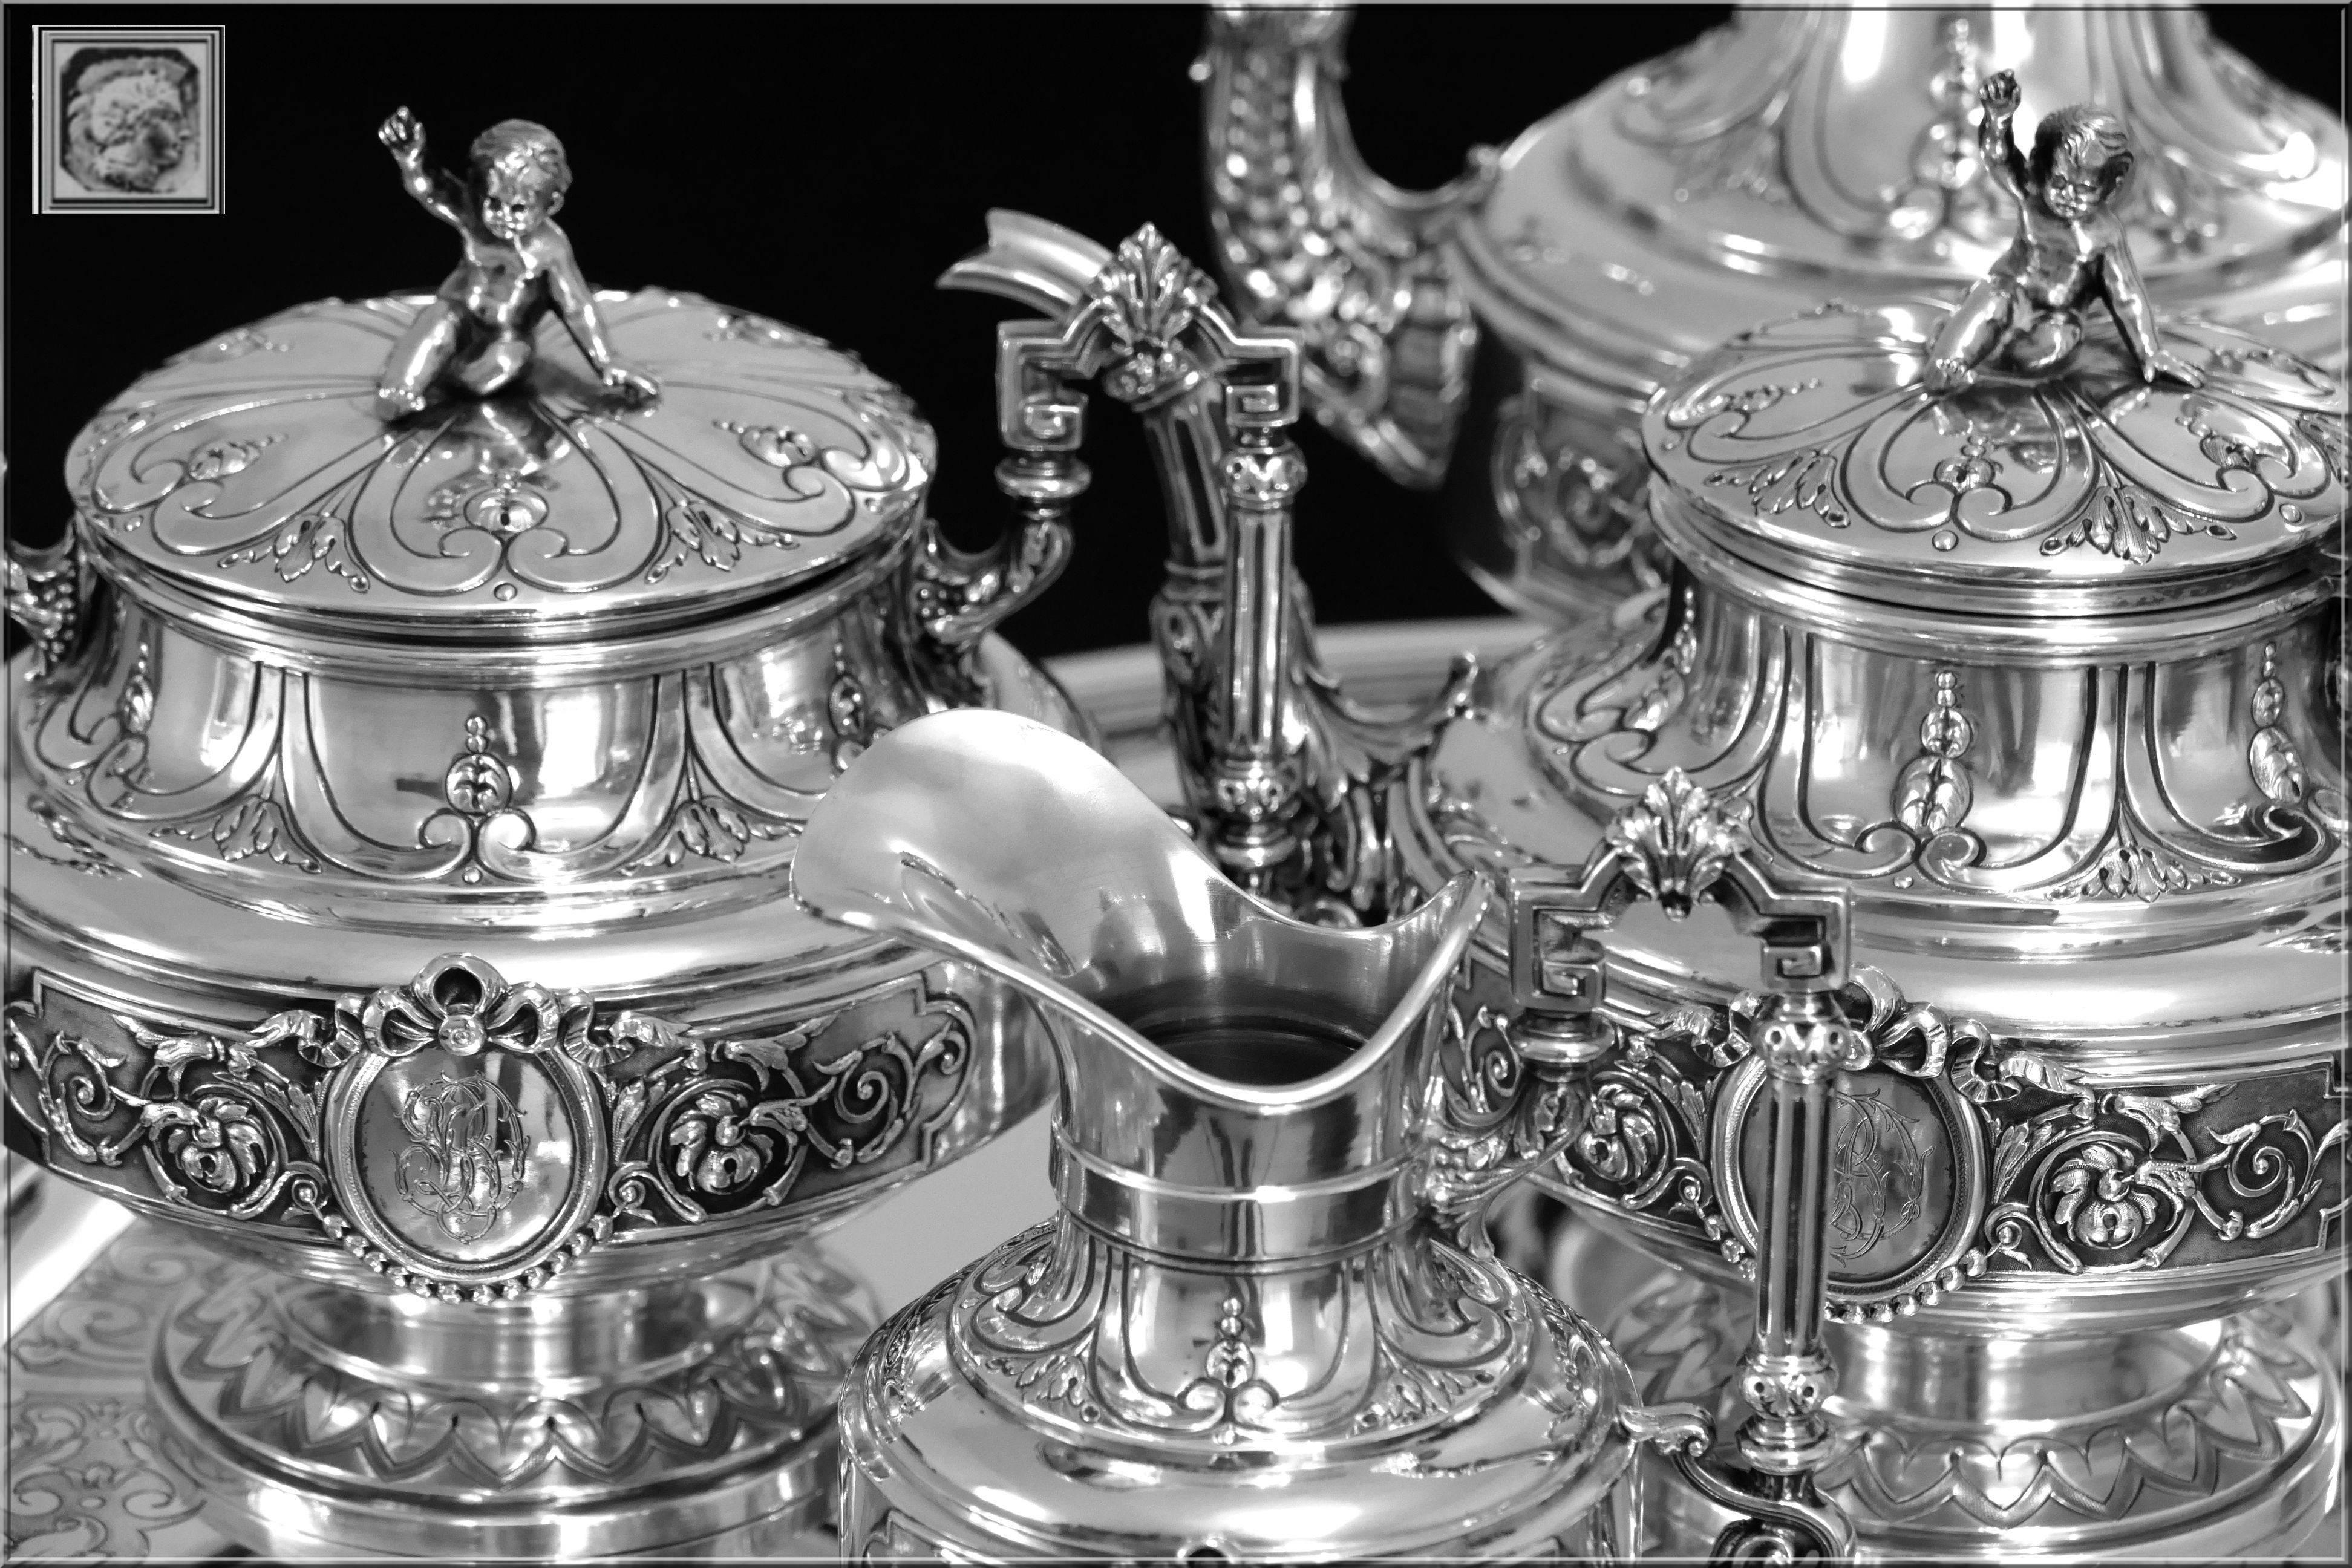 Boulenger Fabulous French All Sterling Silver Tea & Coffee Service 5 pc Putti

Head of Minerve 1 st titre for 950/1000 French Sterling Silver guarantee

A rare tea and coffee service 5 pc in all sterling silver with fabulous and exaggerated